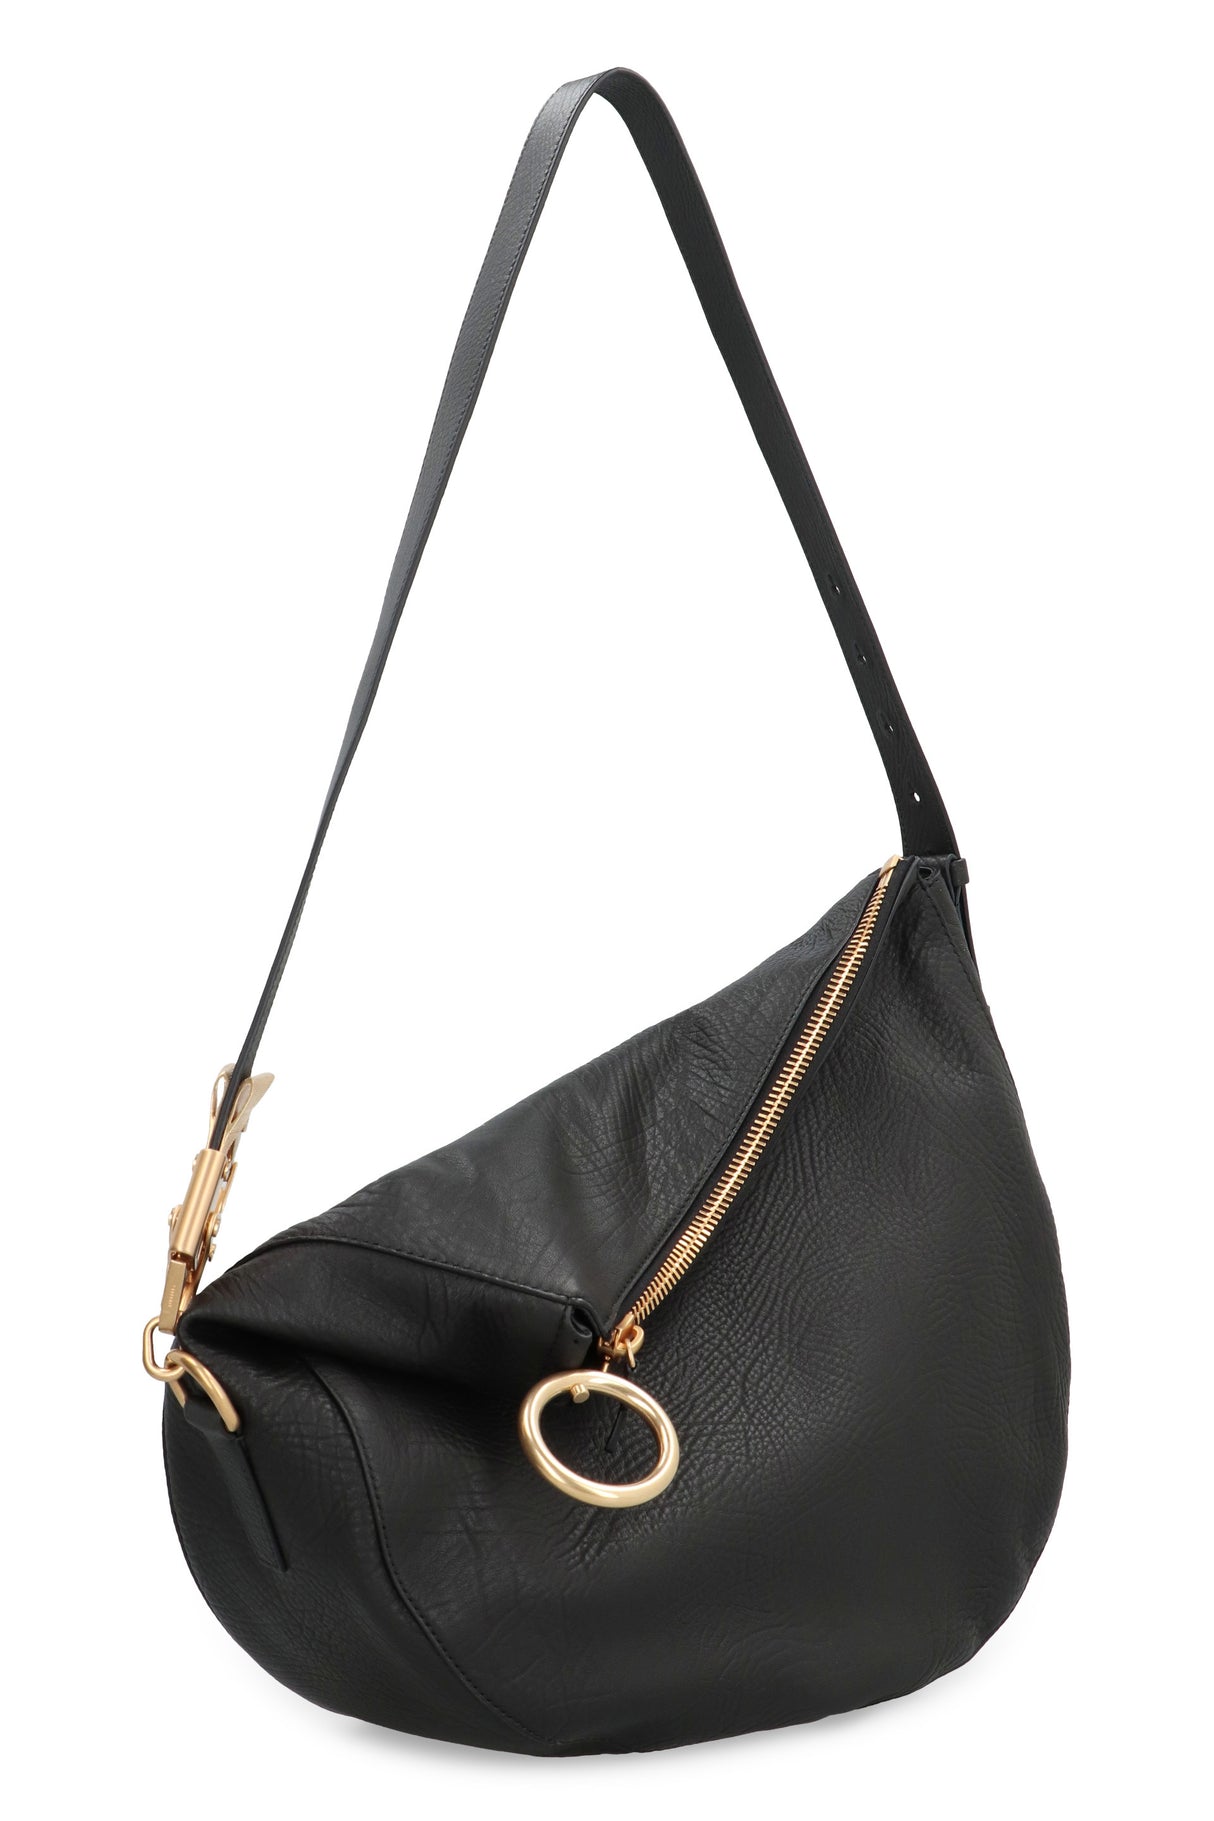 BURBERRY Classic Pebbled Calfskin Medium Handbag with Gold-Tone Accents and Adjustable Strap - Black